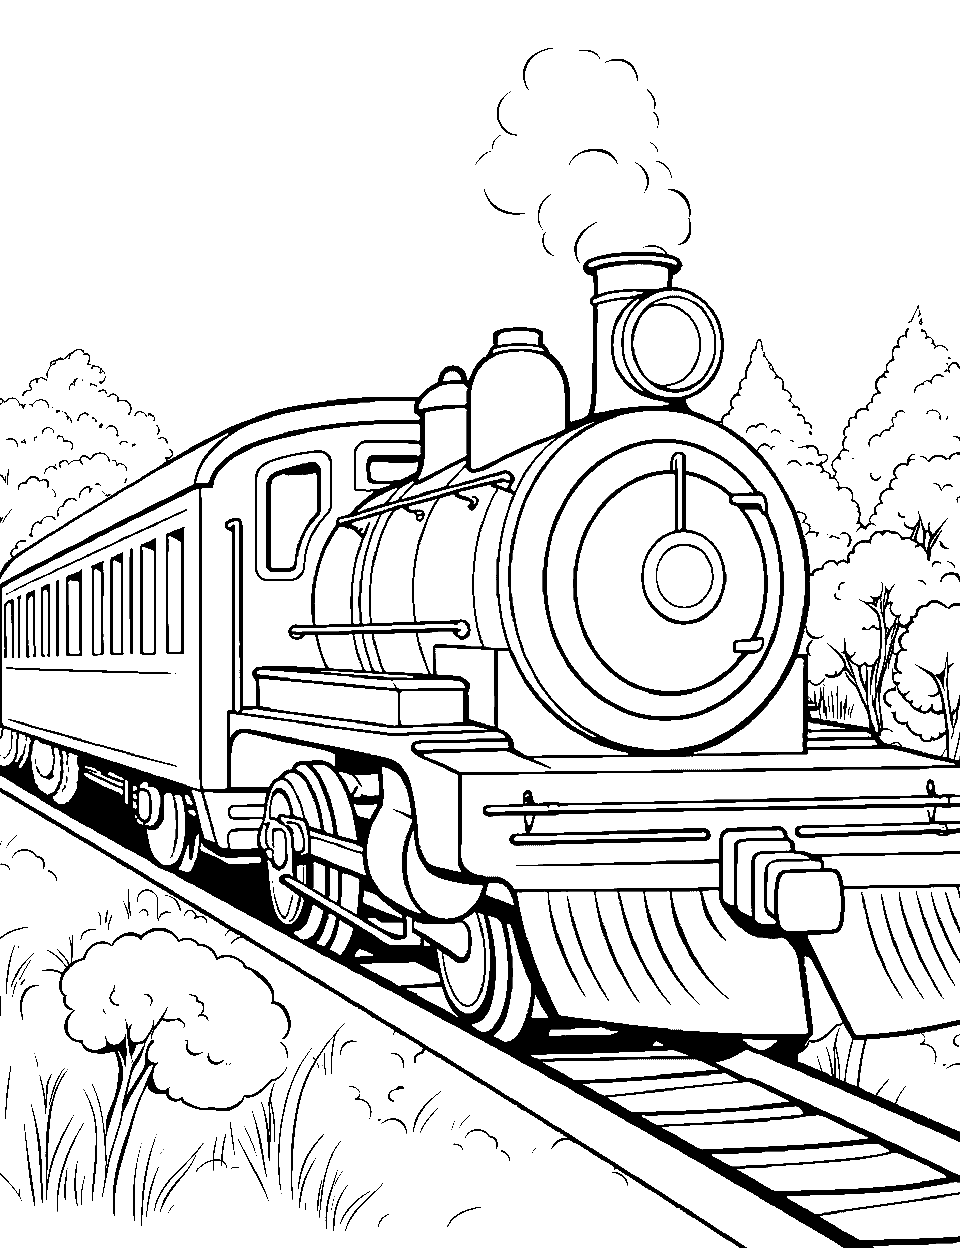 Train Through a Forest Coloring Page - A train winding through a deep forest.